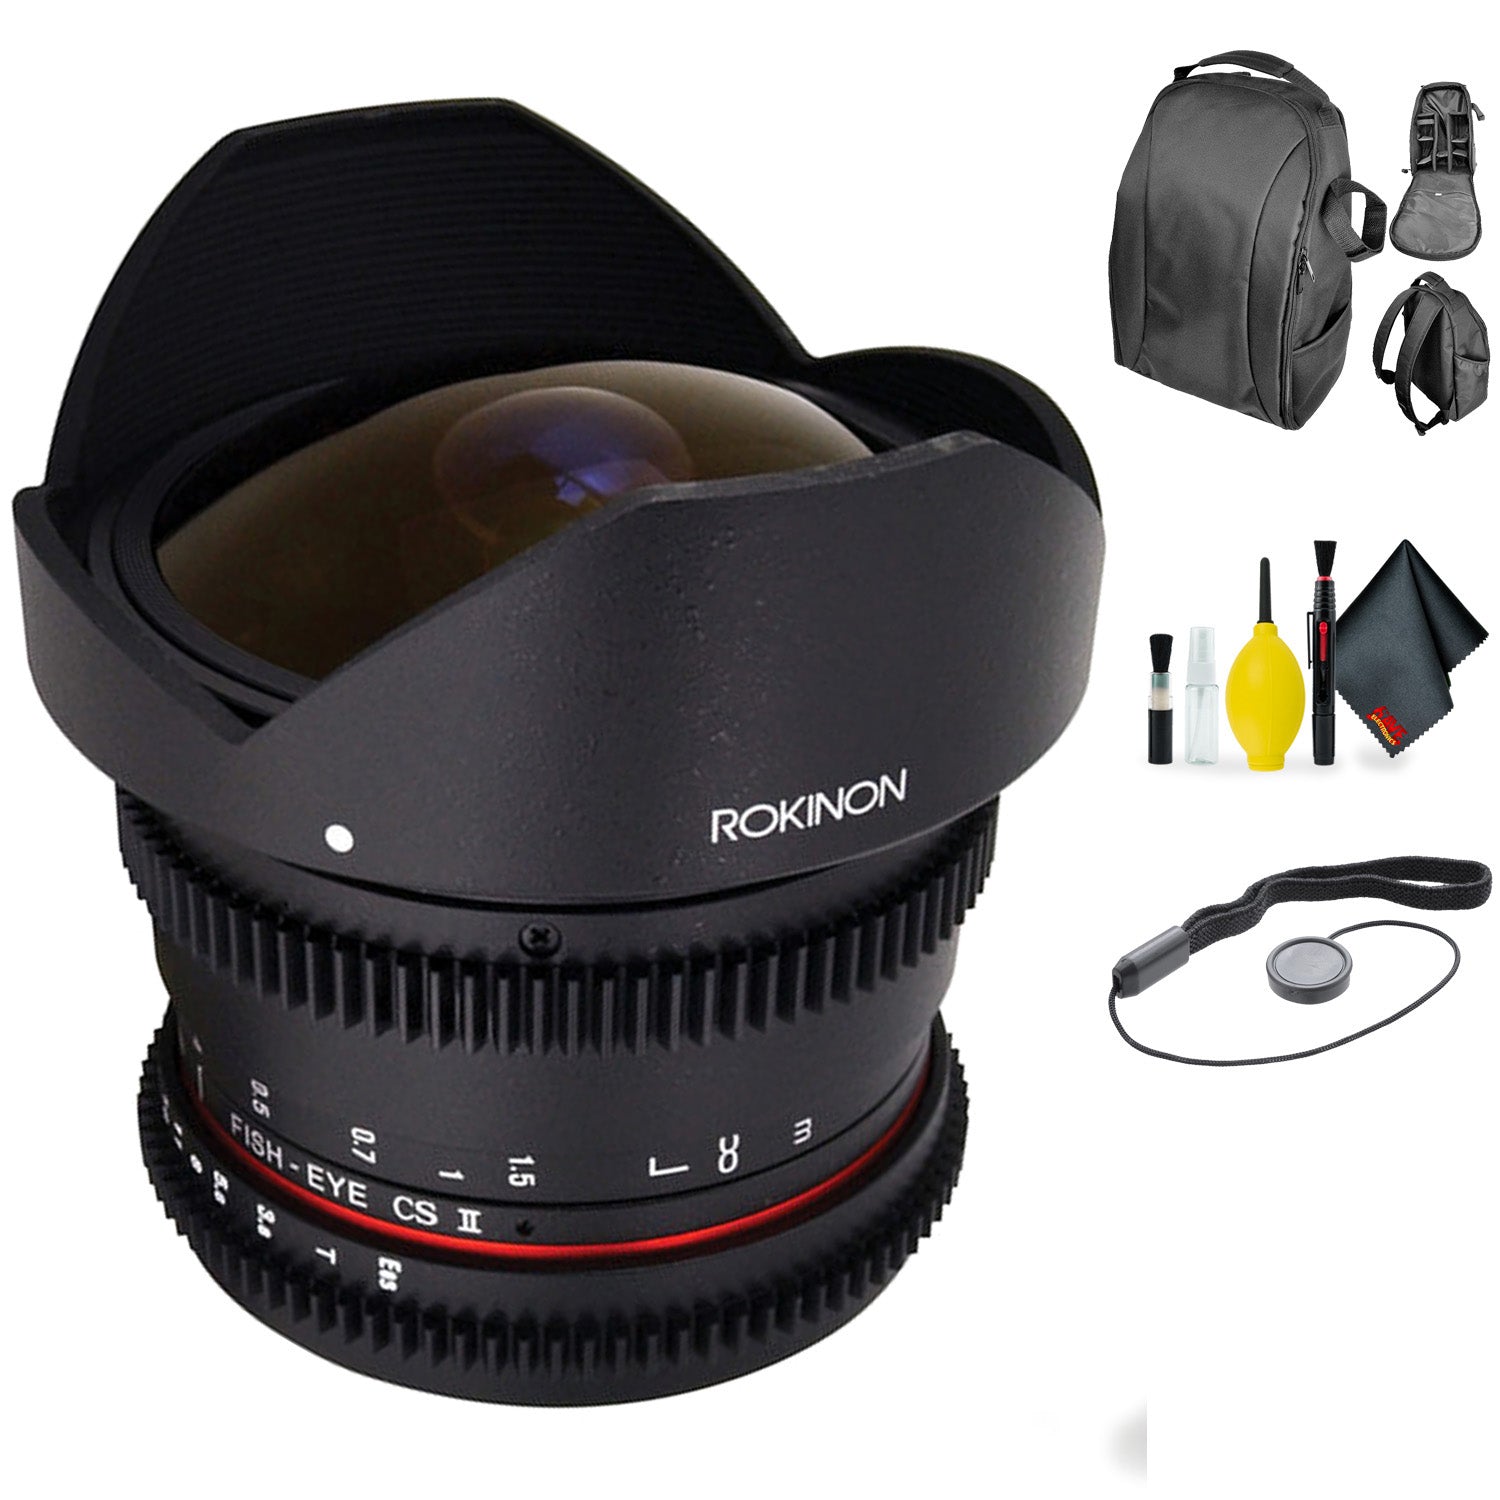 ROKINON 8MM T/3.8 CINE HD Sony inchE inch + Deluxe Lens Cleaning Kit Bundle